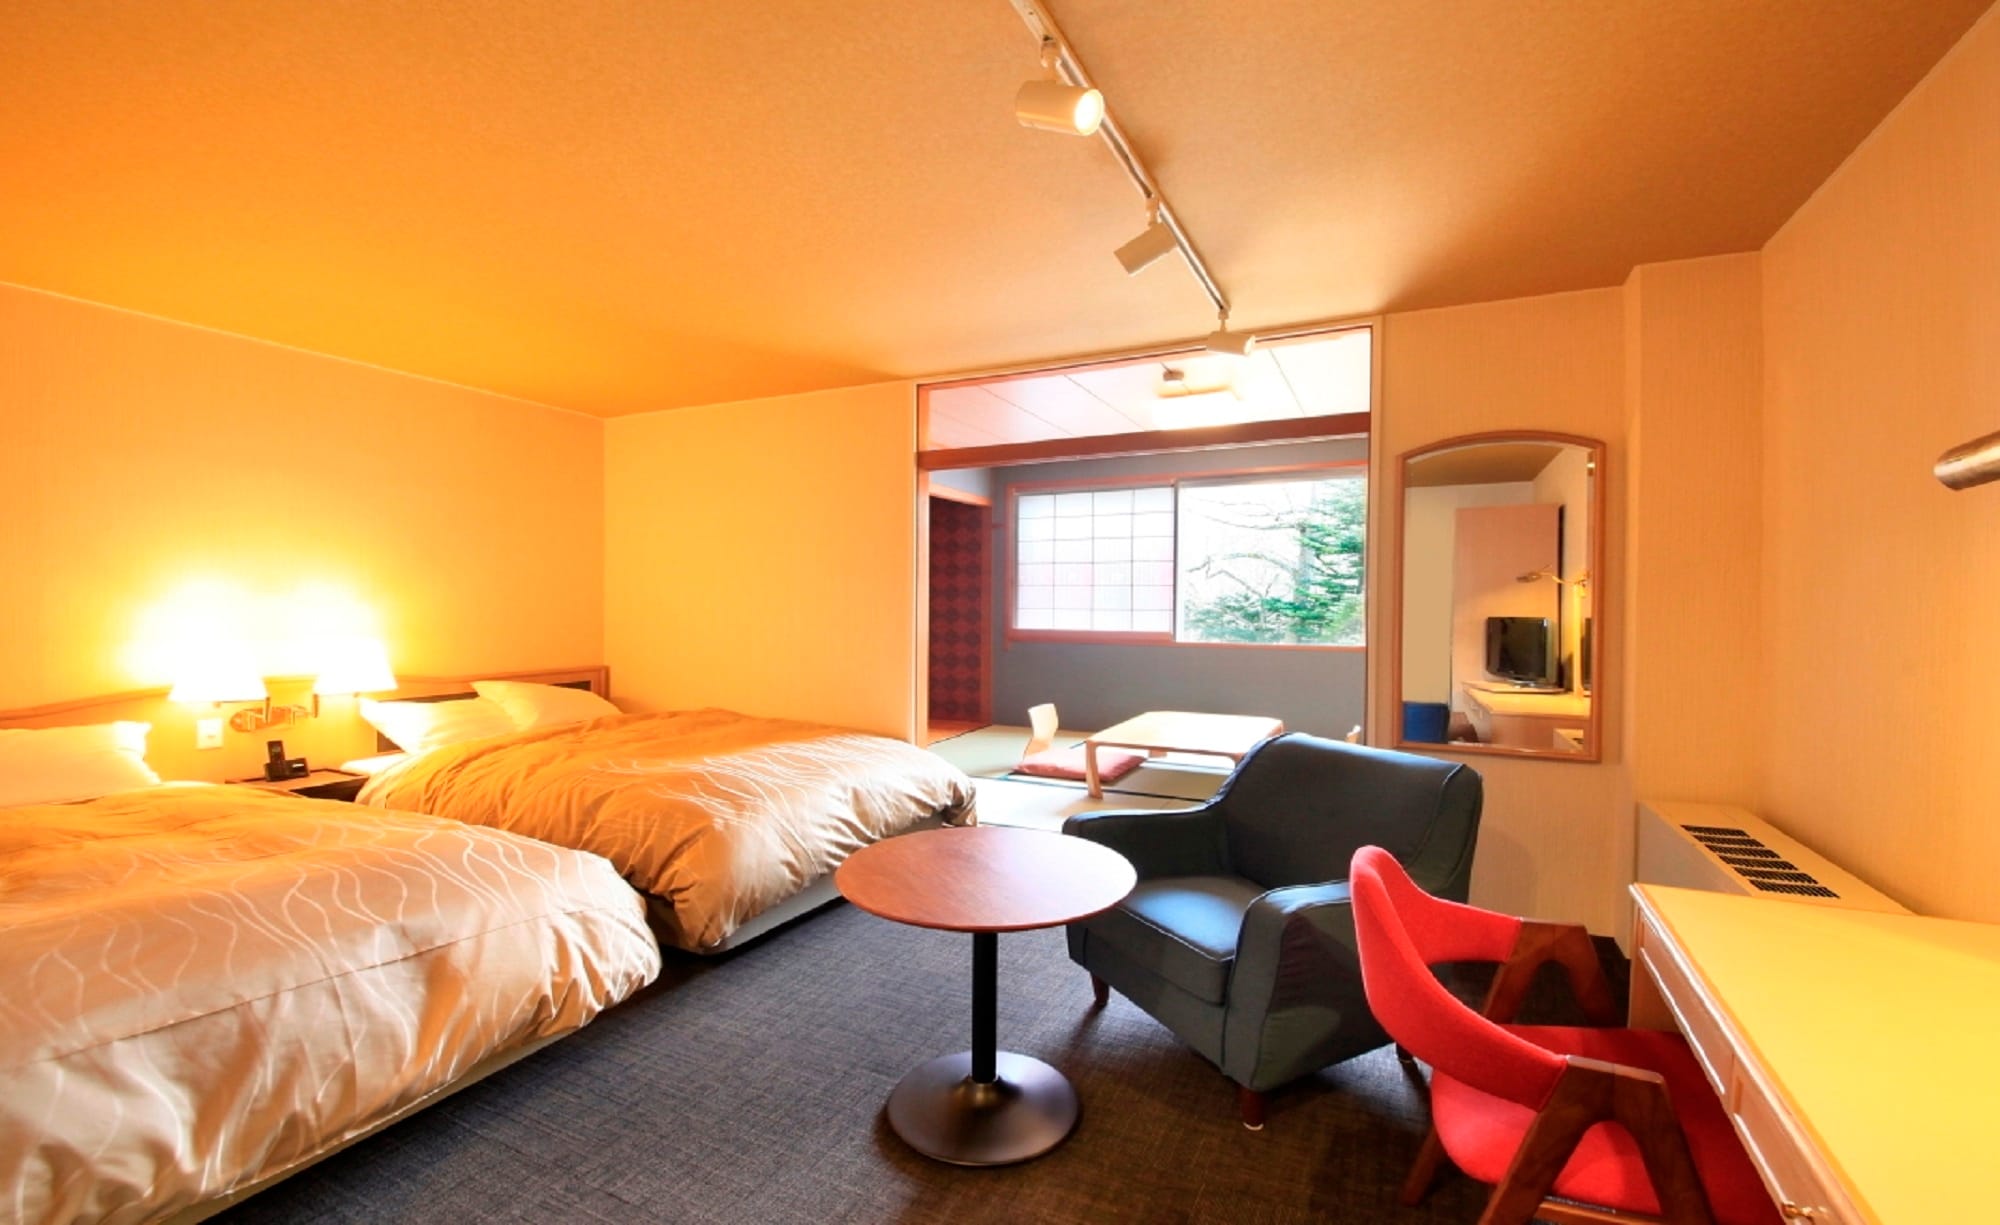 ■ "Japanese-Western style room" This is a Japanese-Western style room that is rare in Karuizawa.